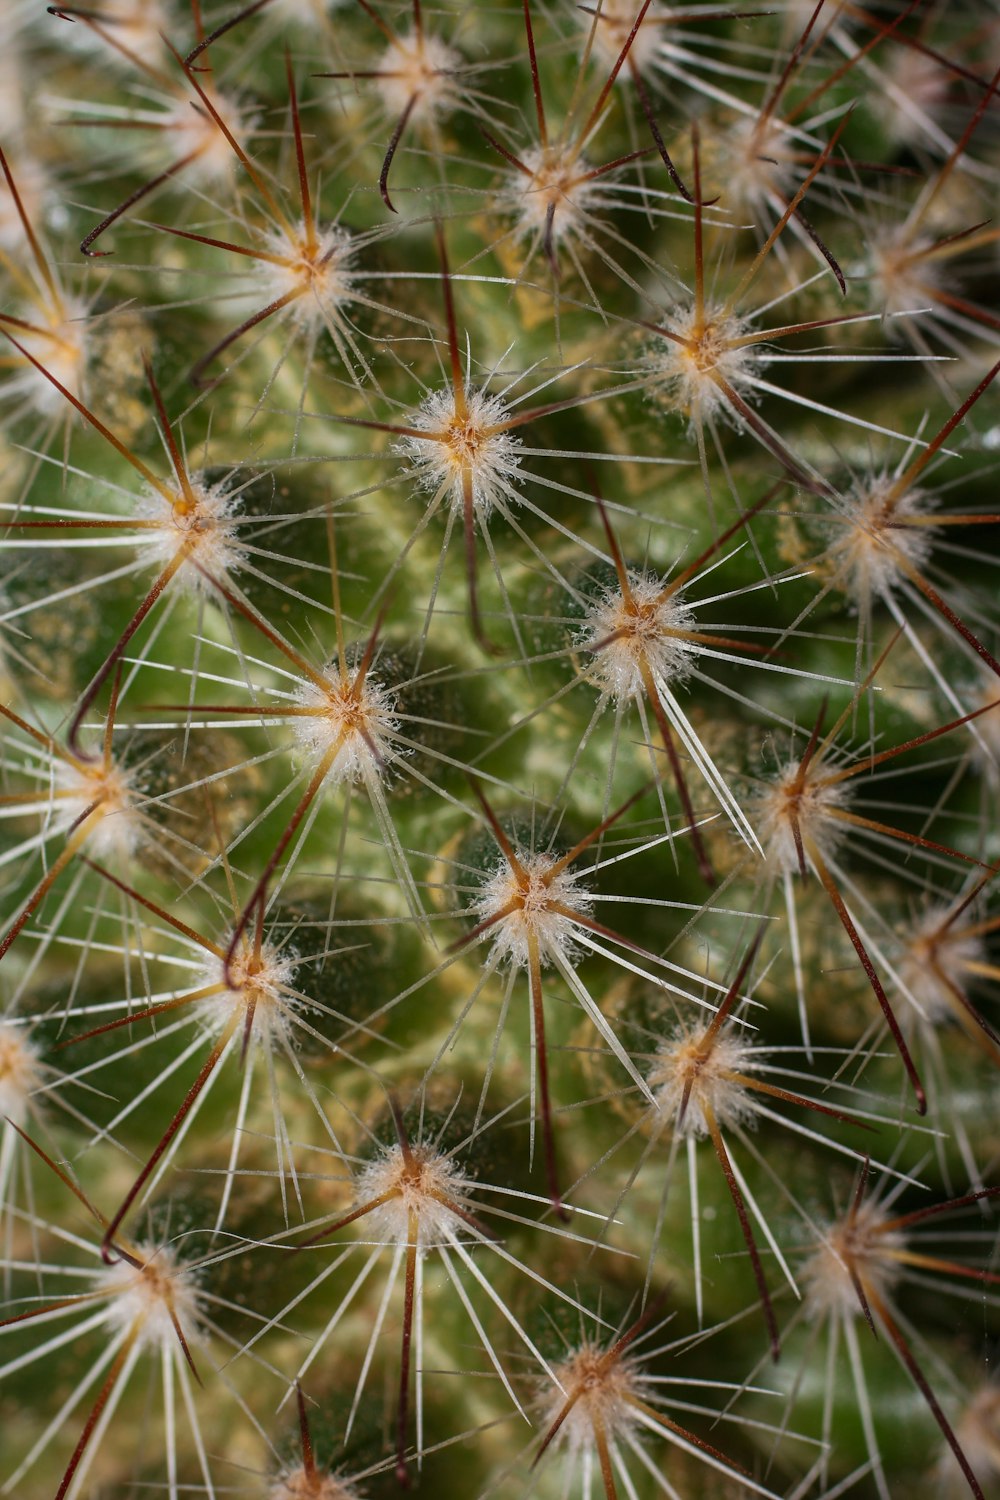 a close up of a cactus plant with lots of small white flowers